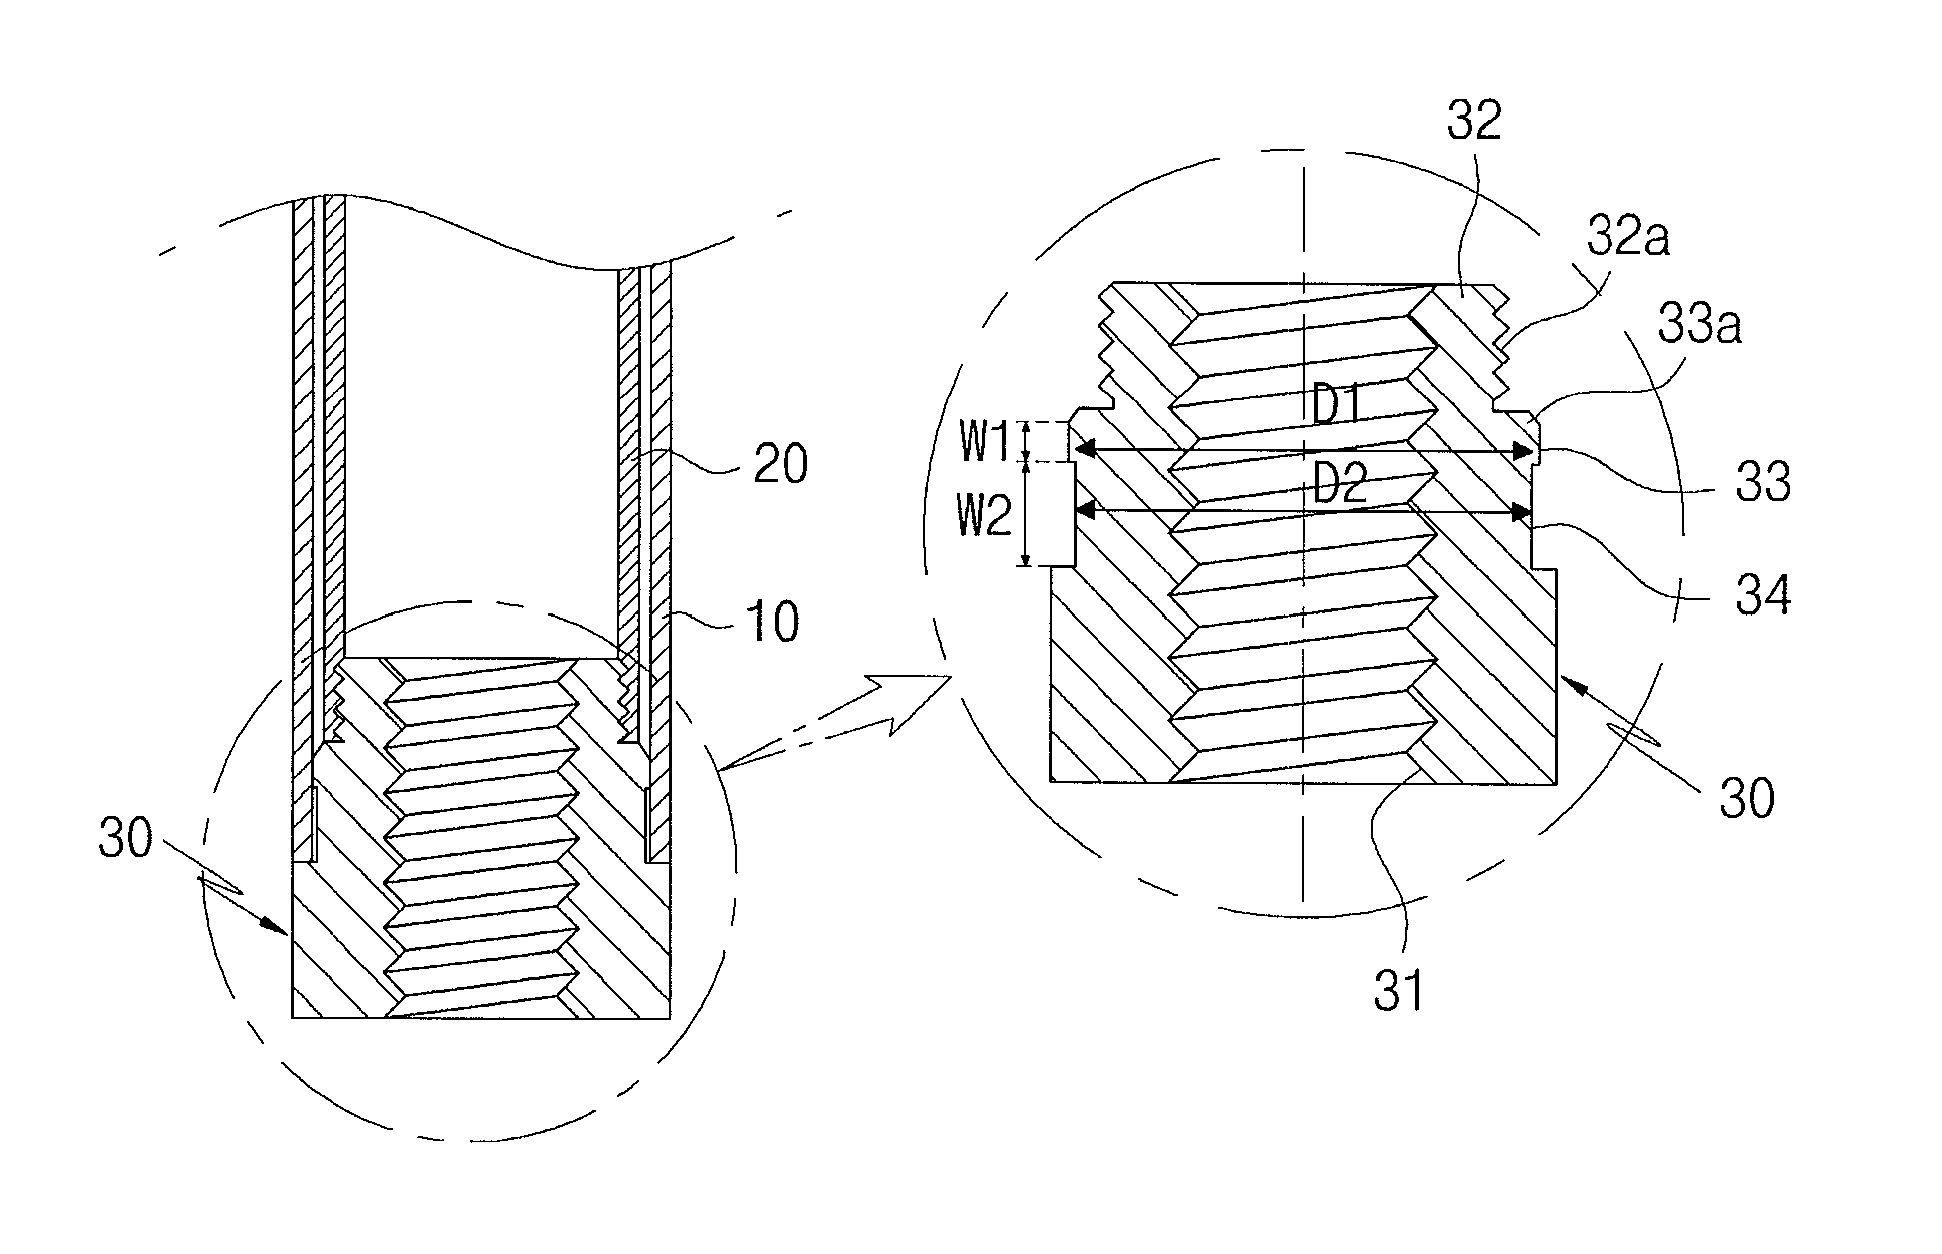 Guide thimble plug for nuclear fuel assembly